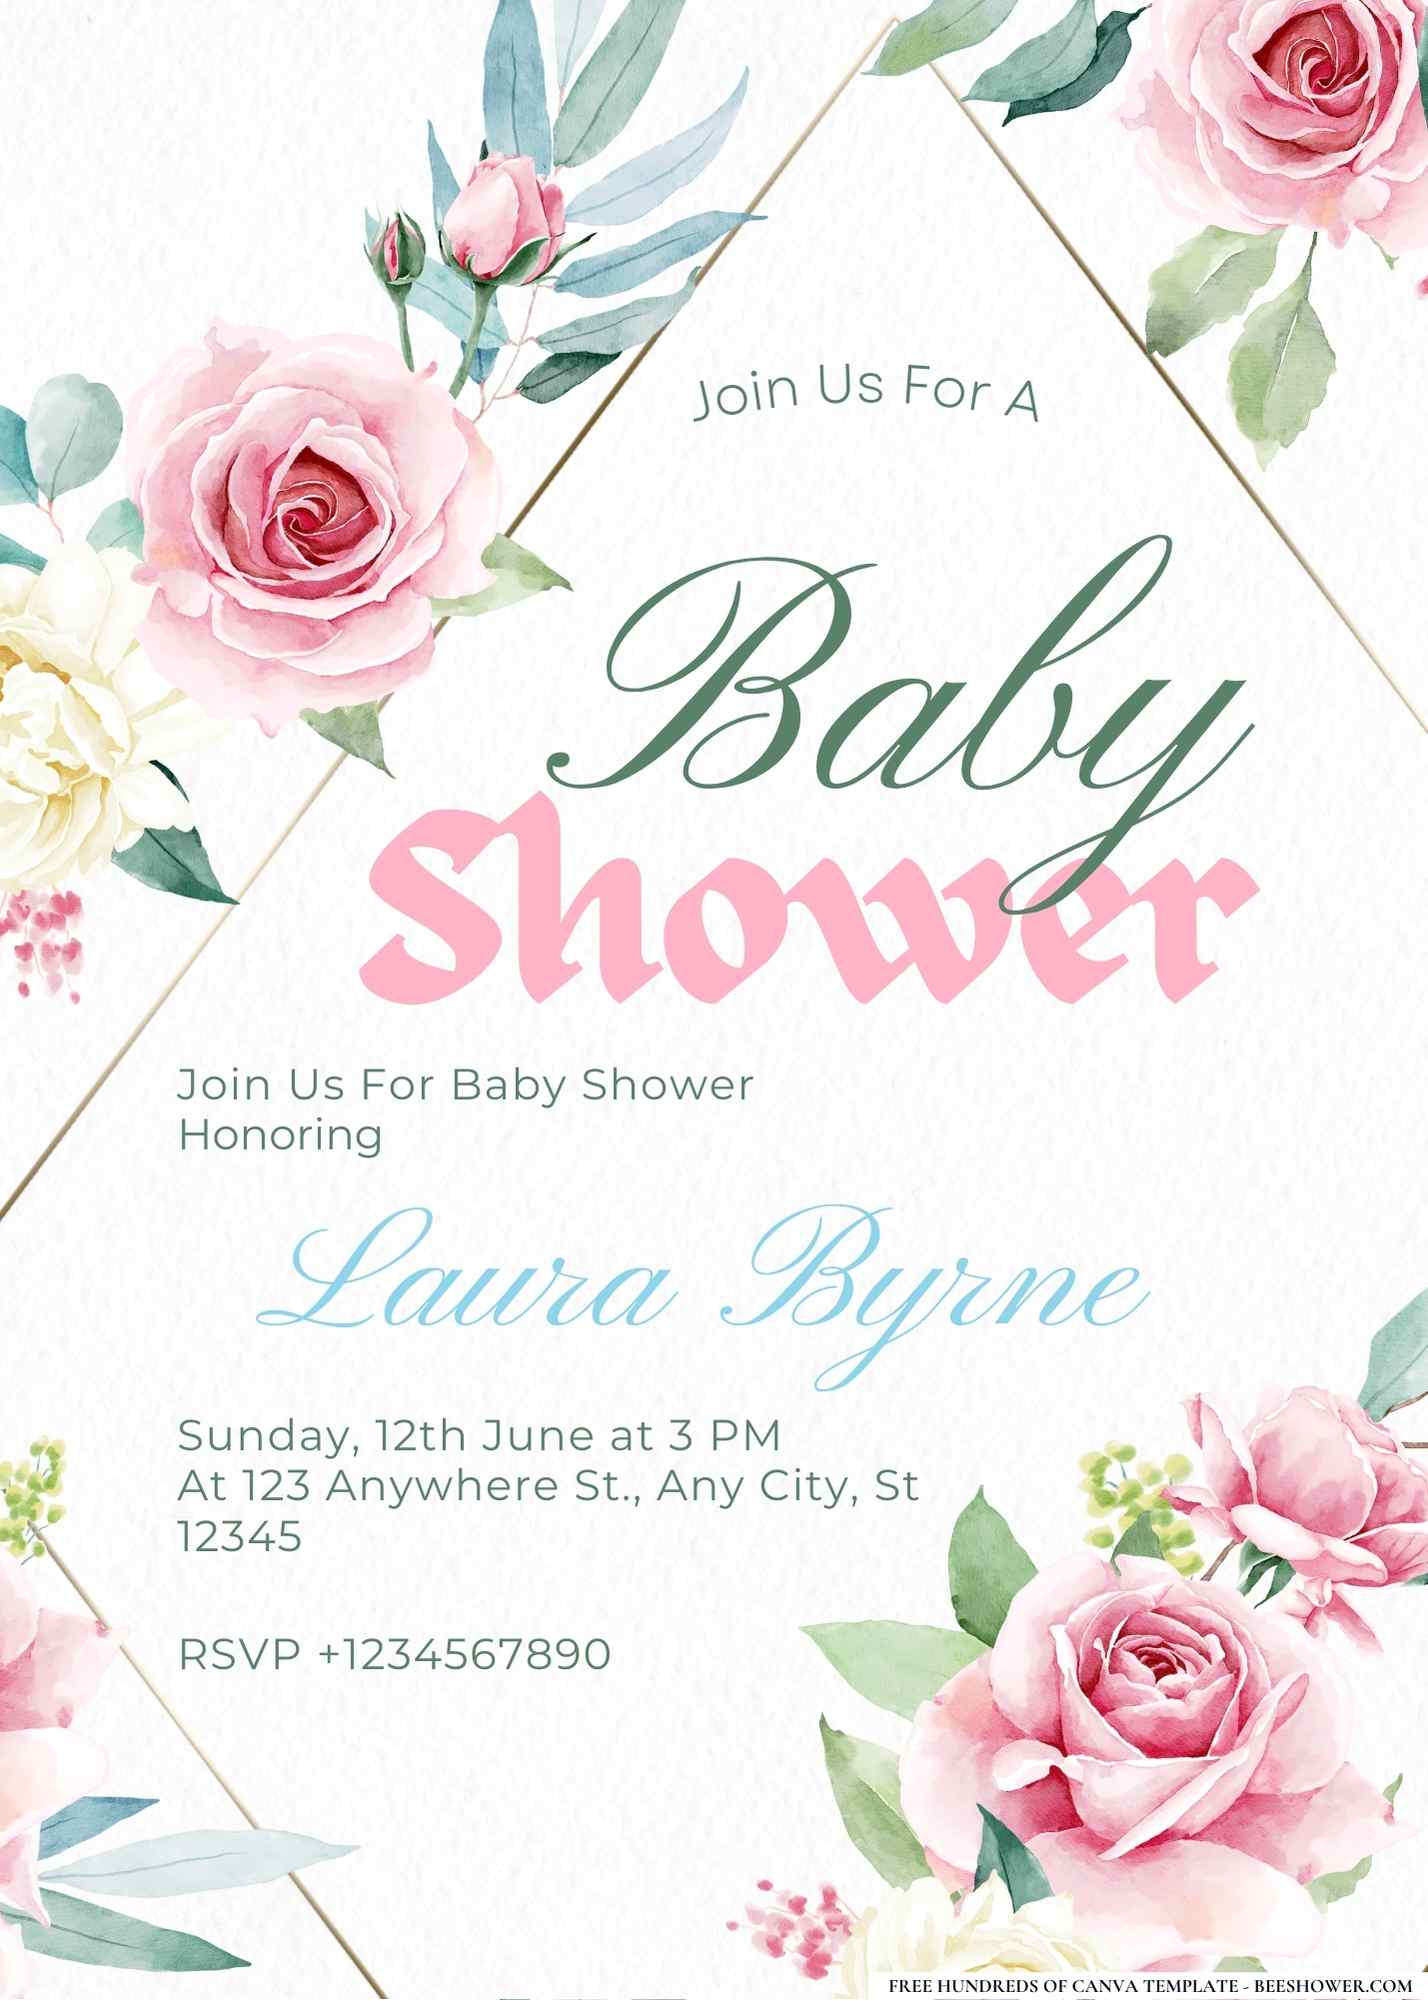 A Rose is Born Baby Shower Invitation